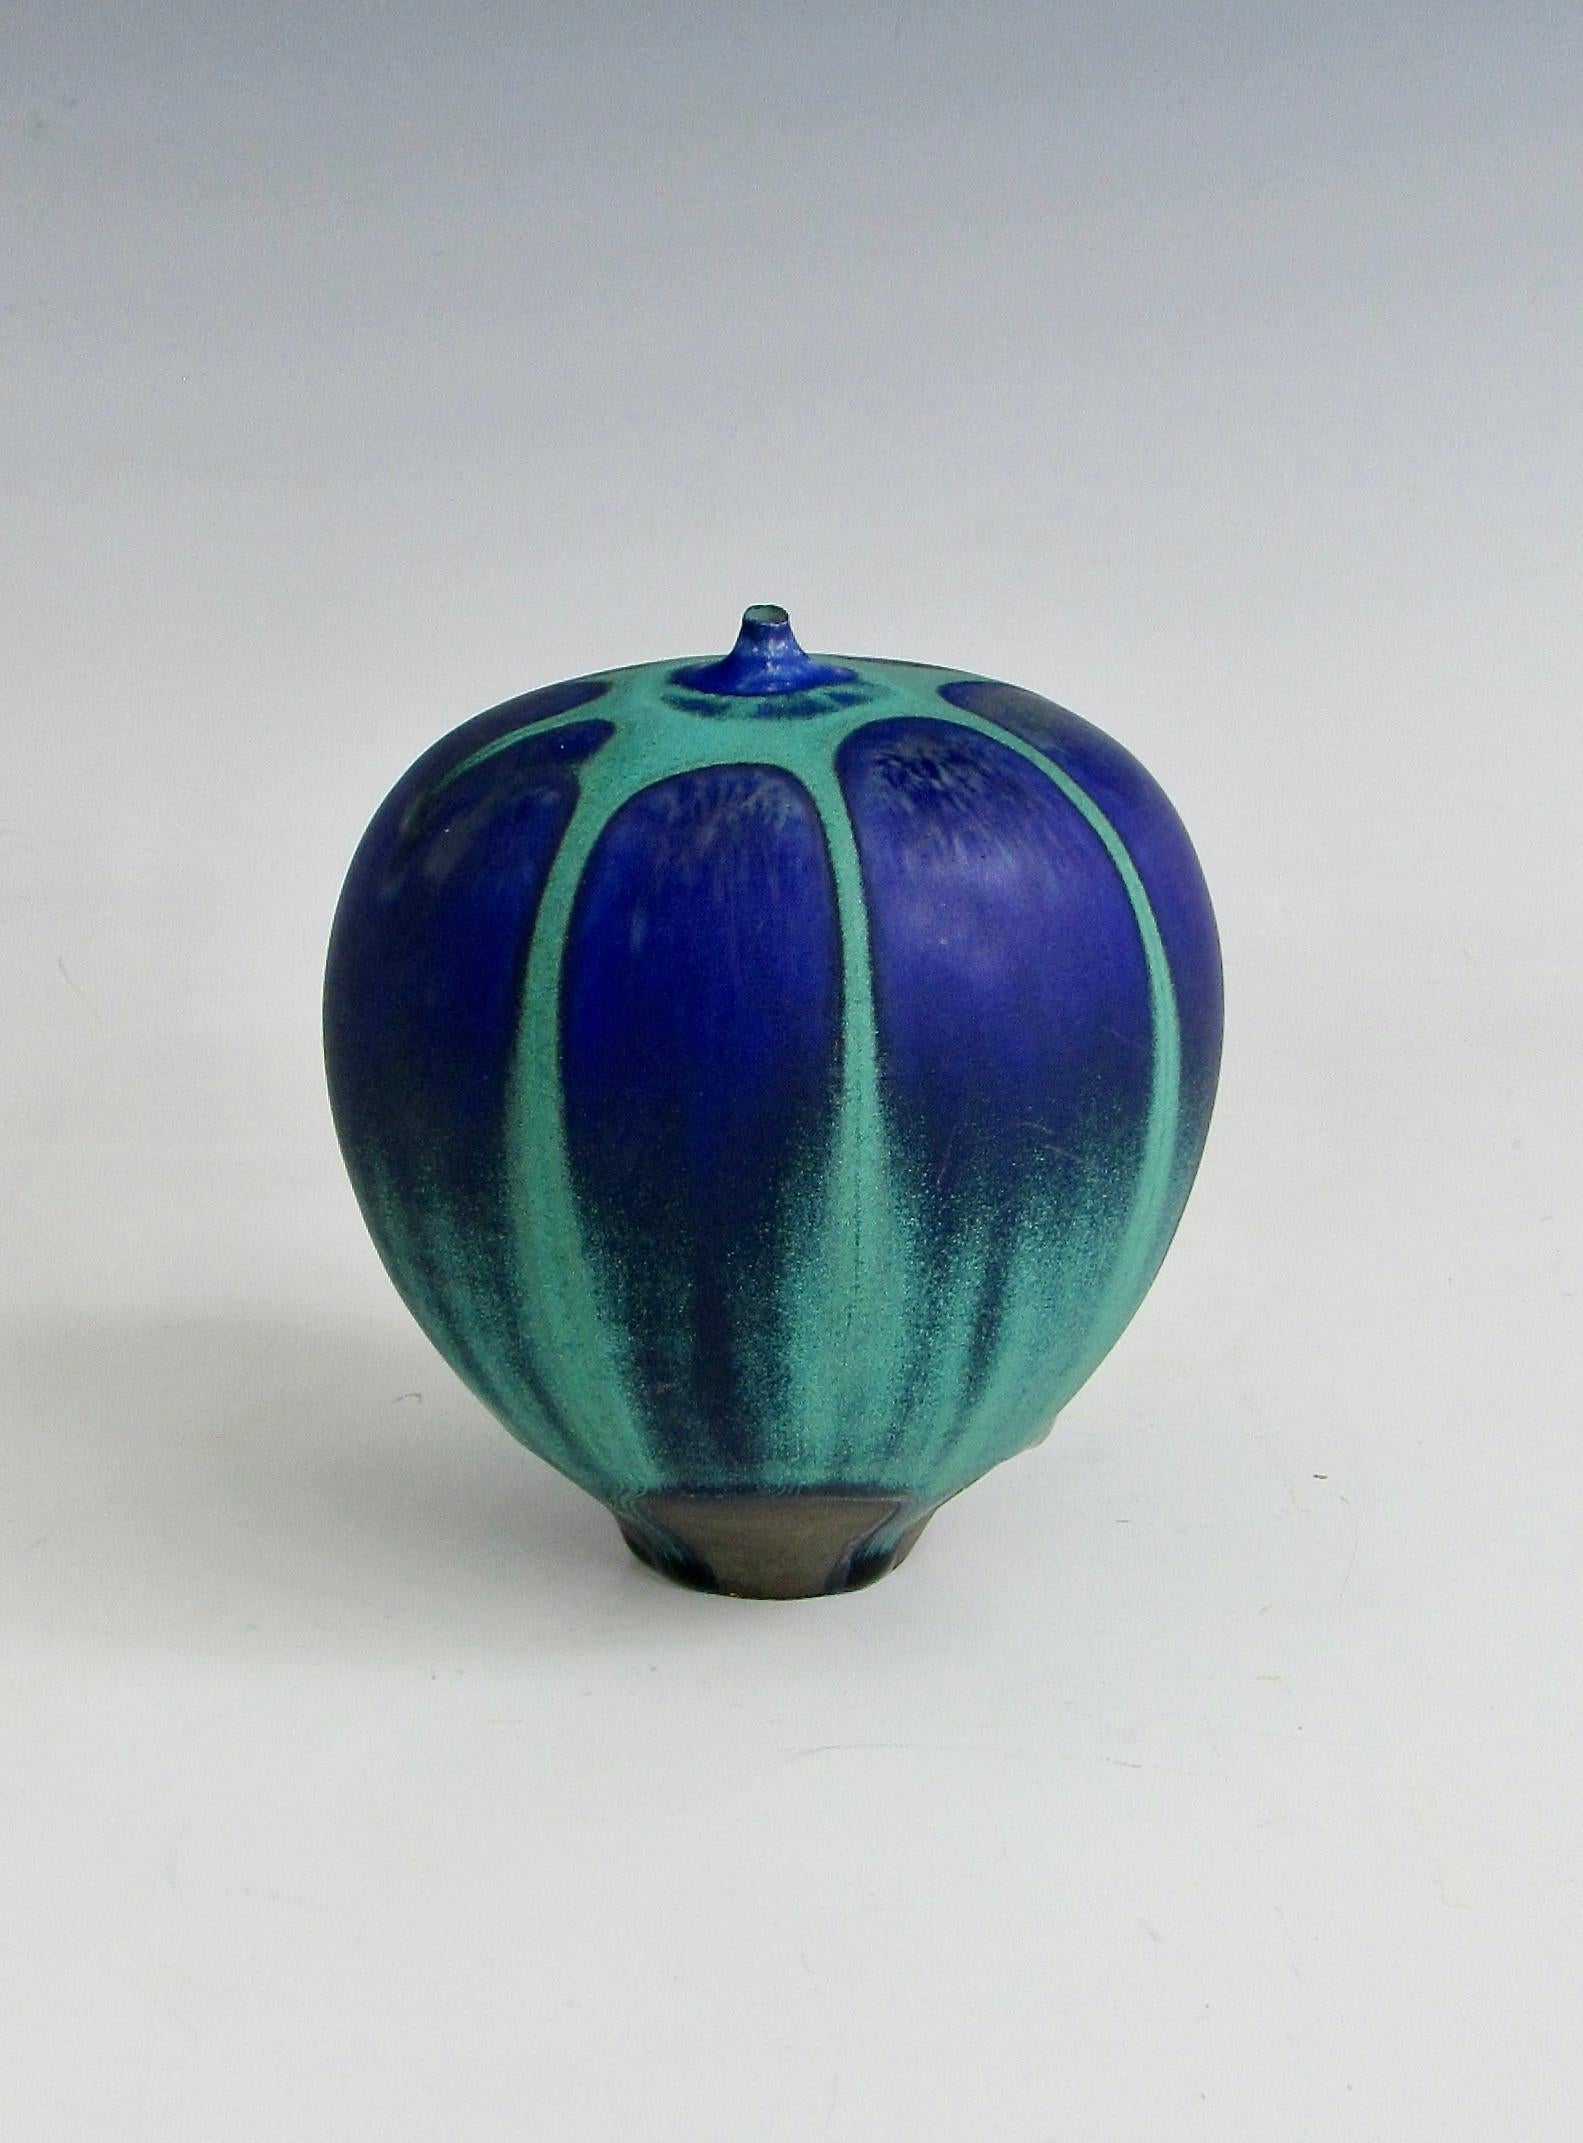  Rose Cabat Deep Blue Over Sea Green  Feelie Vase Weed Pot In Good Condition For Sale In Ferndale, MI